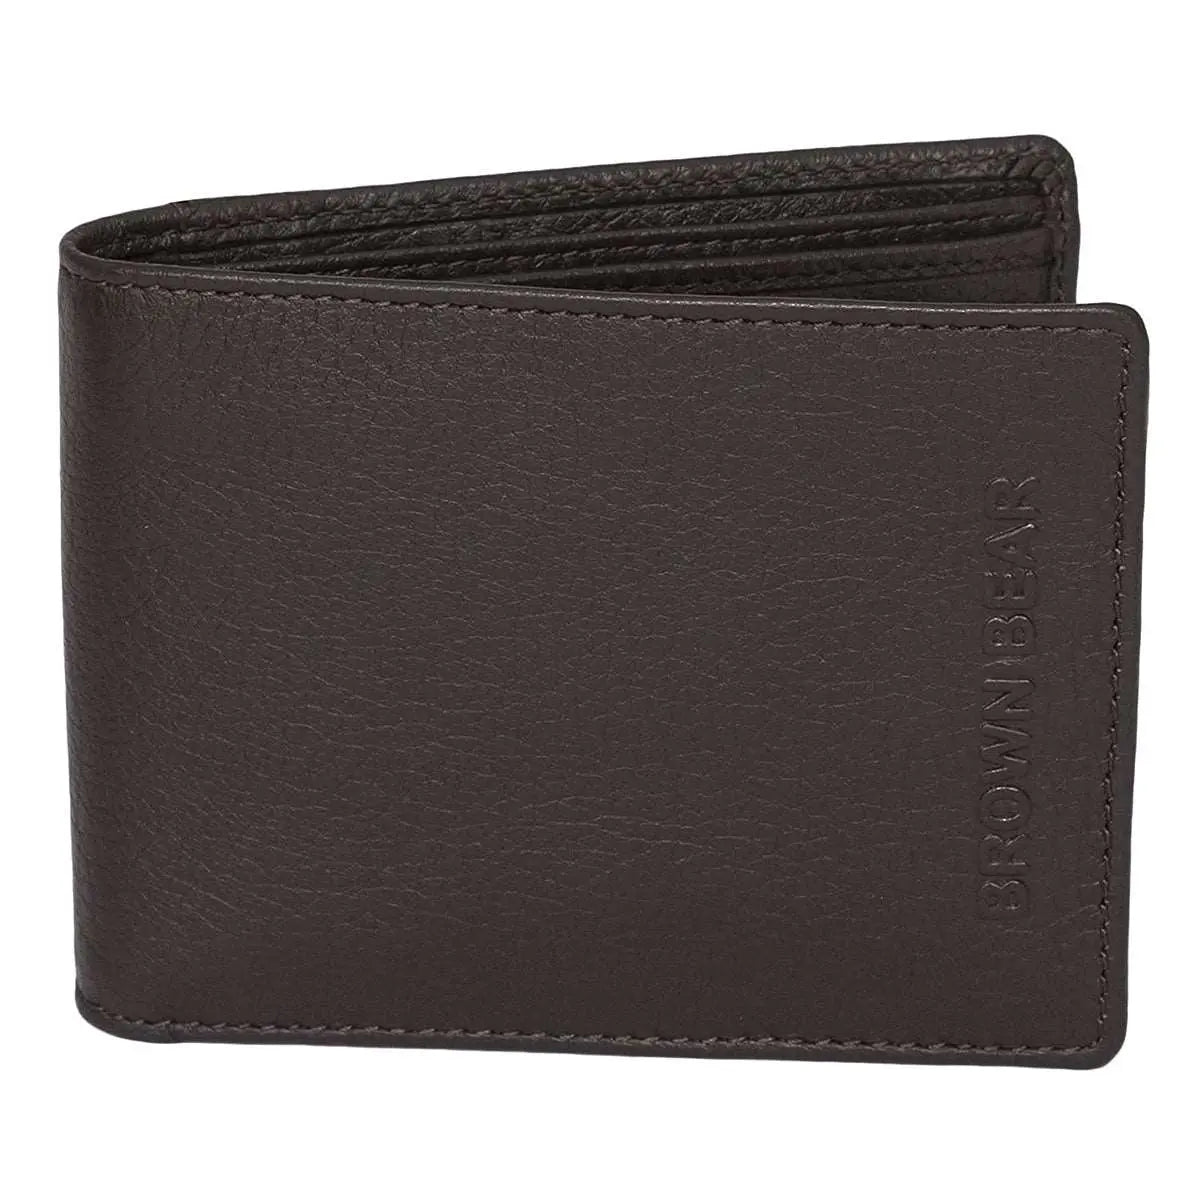 Buy Moochies Genuine Leather Mens Wallet Color Black at Amazon.in